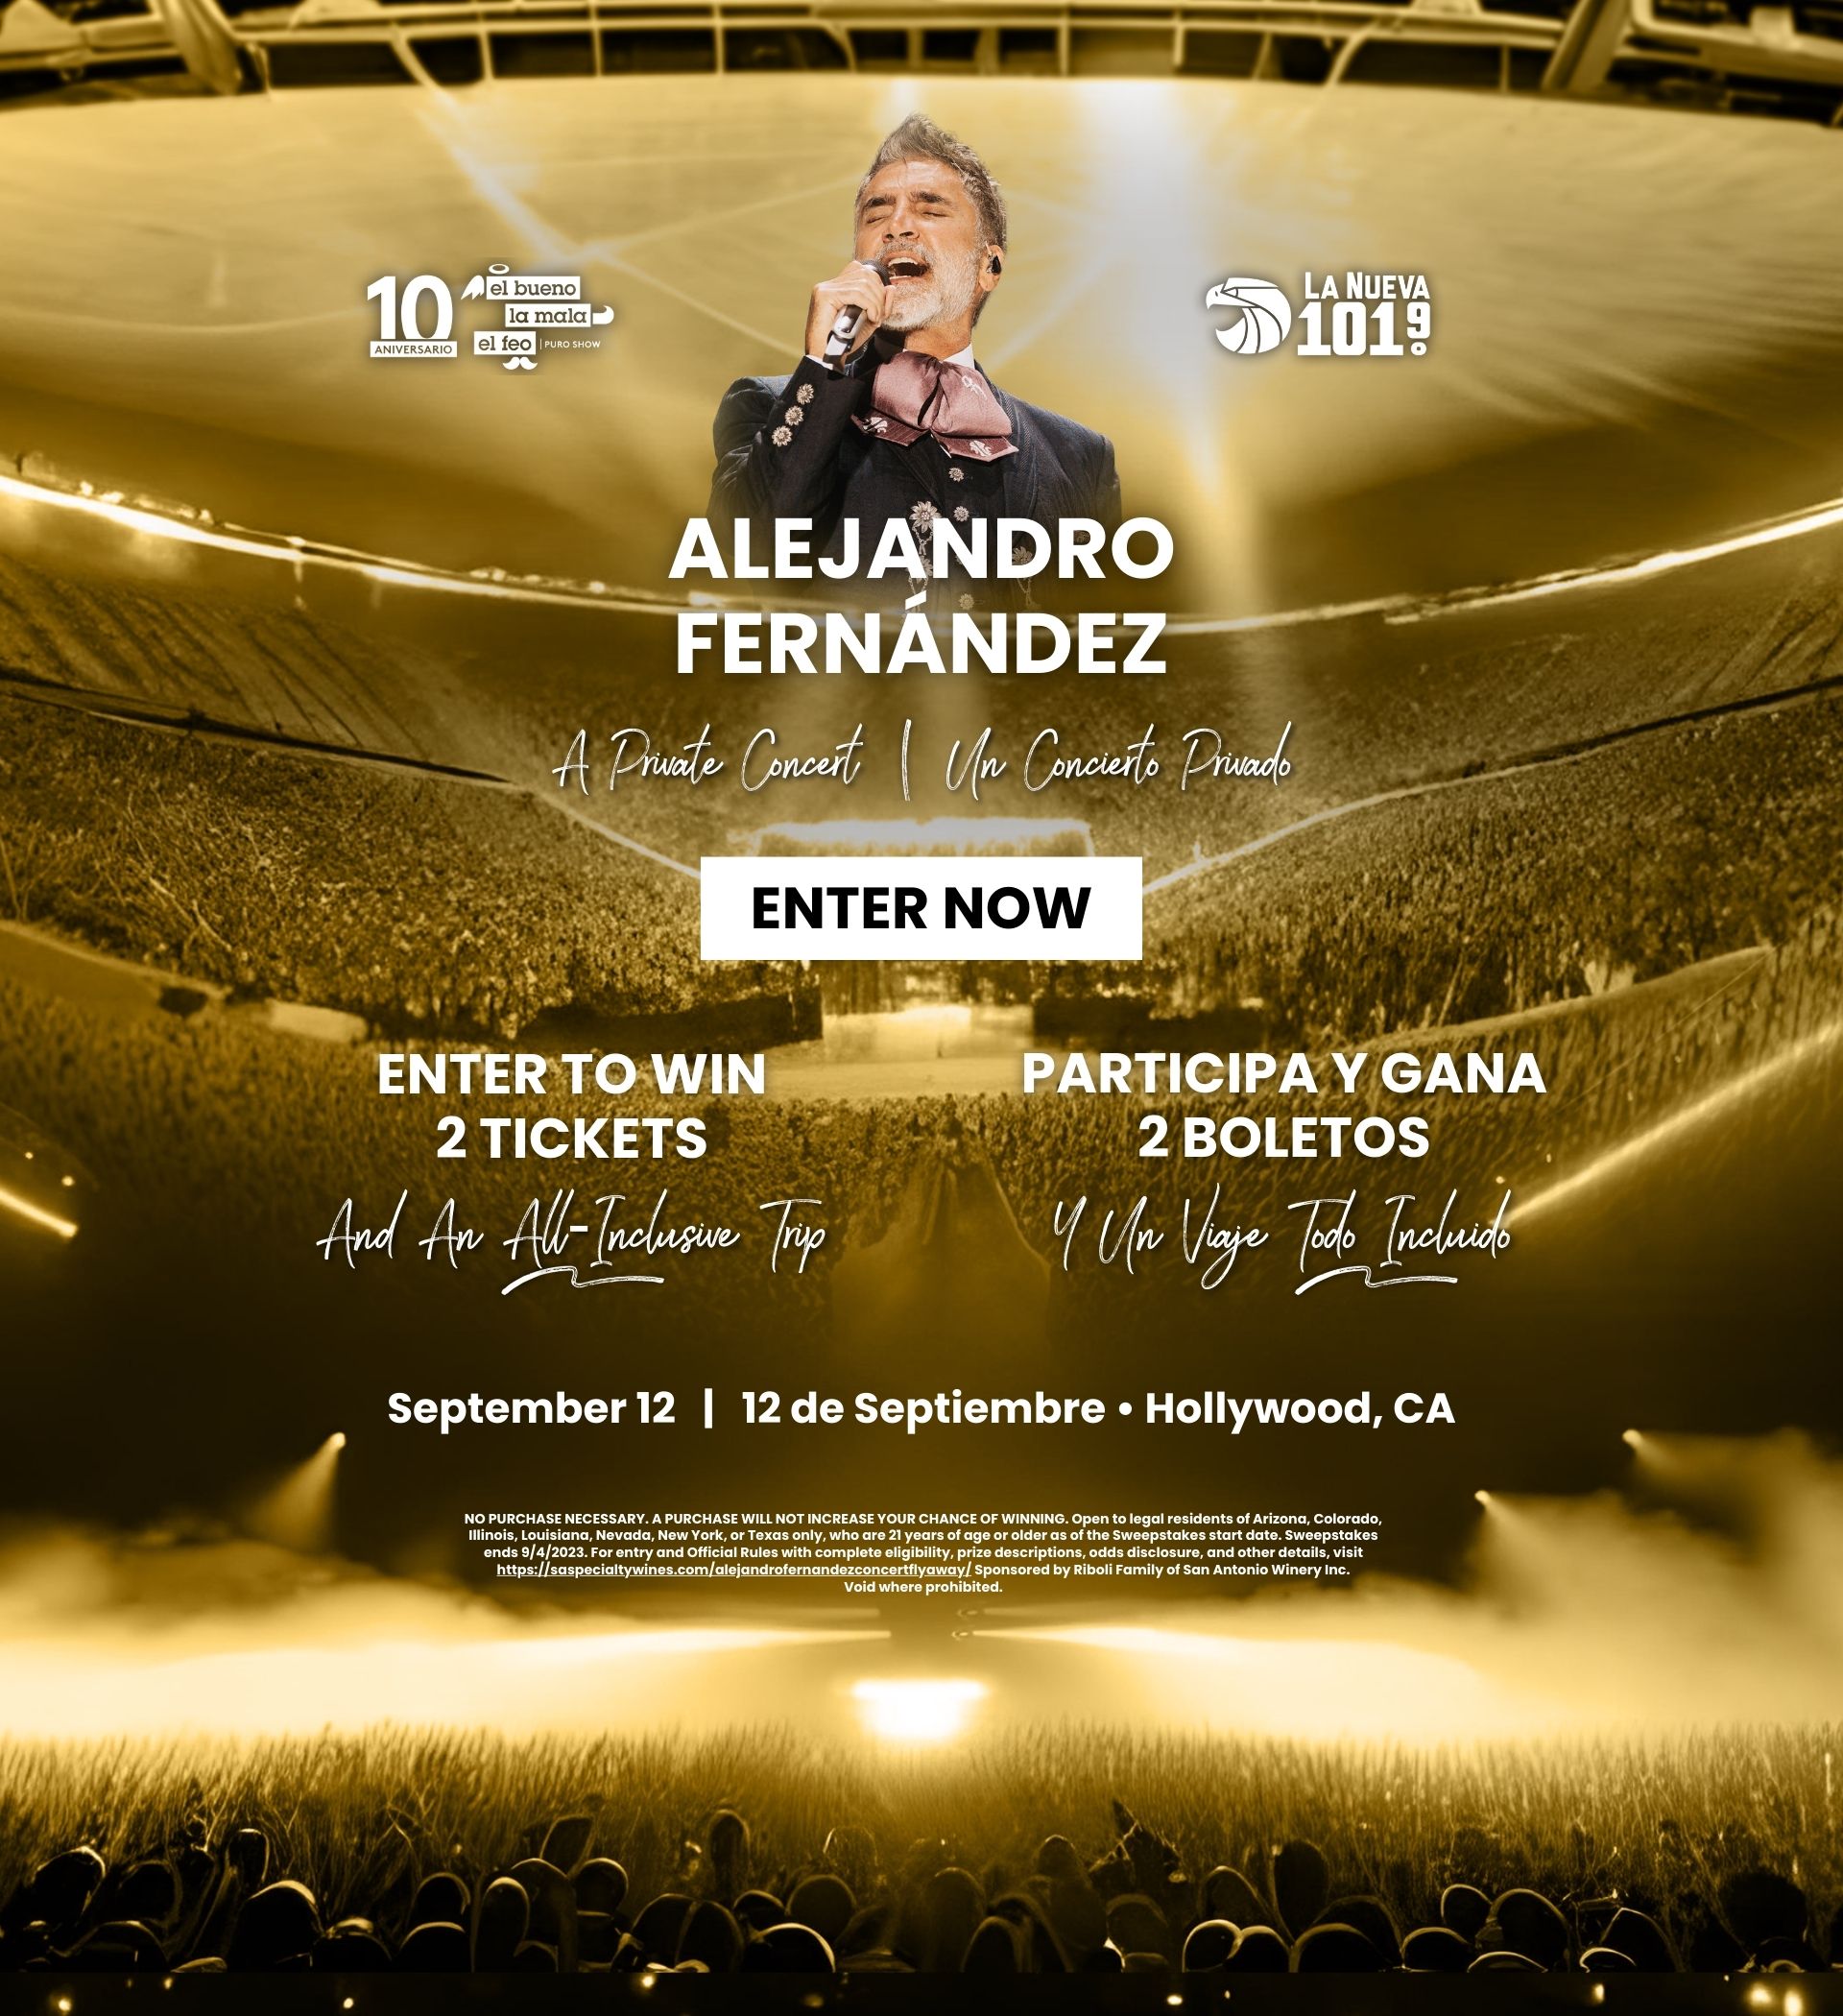 San Antonio Specialty is giving you the opportunity to win 2 tickets and an all-inclusive trip to Hollywood, CA to see Alejandro Fernández in a private concert. 